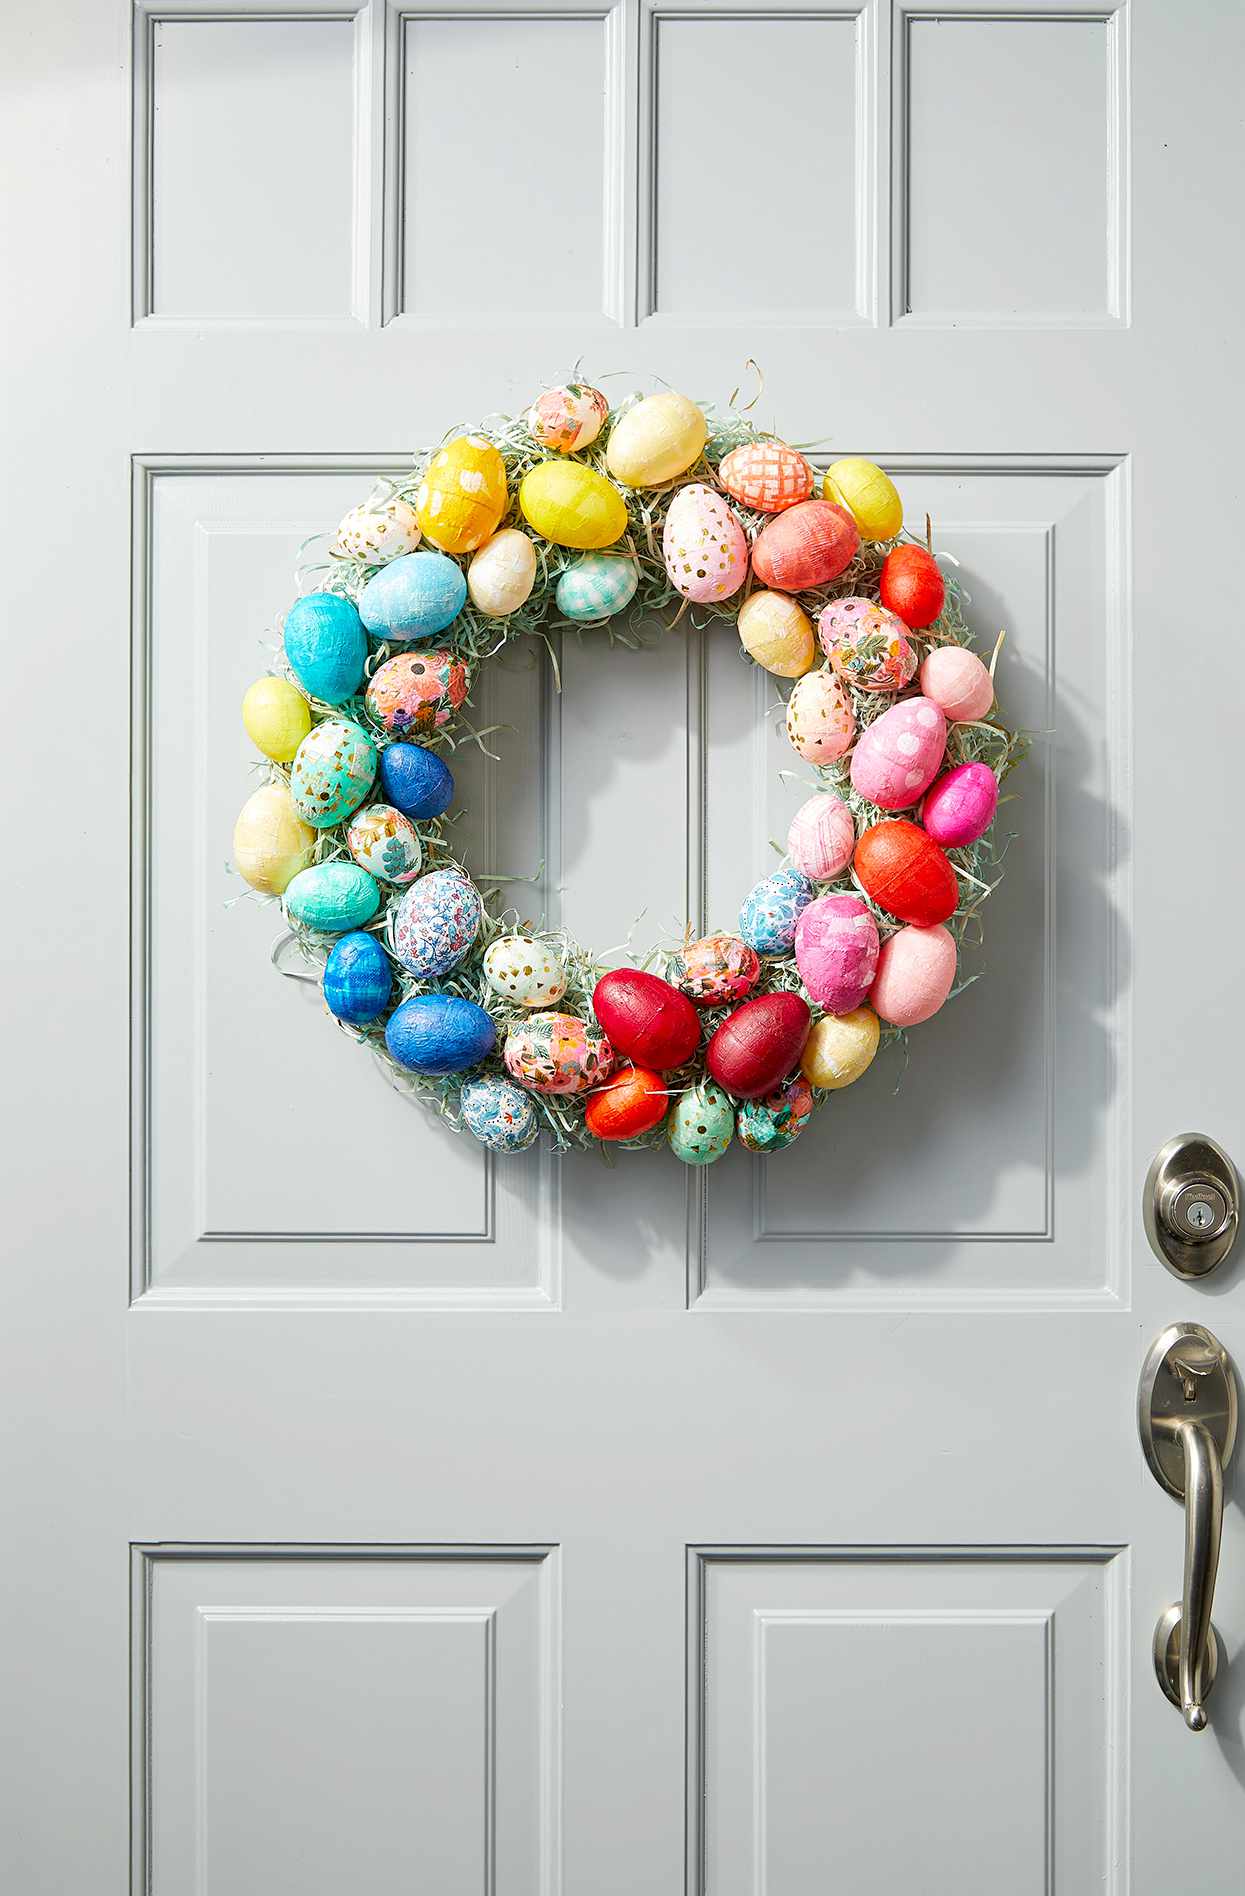 Pretty Ways to Decorate with Easter Eggs   Better Homes & Gardens